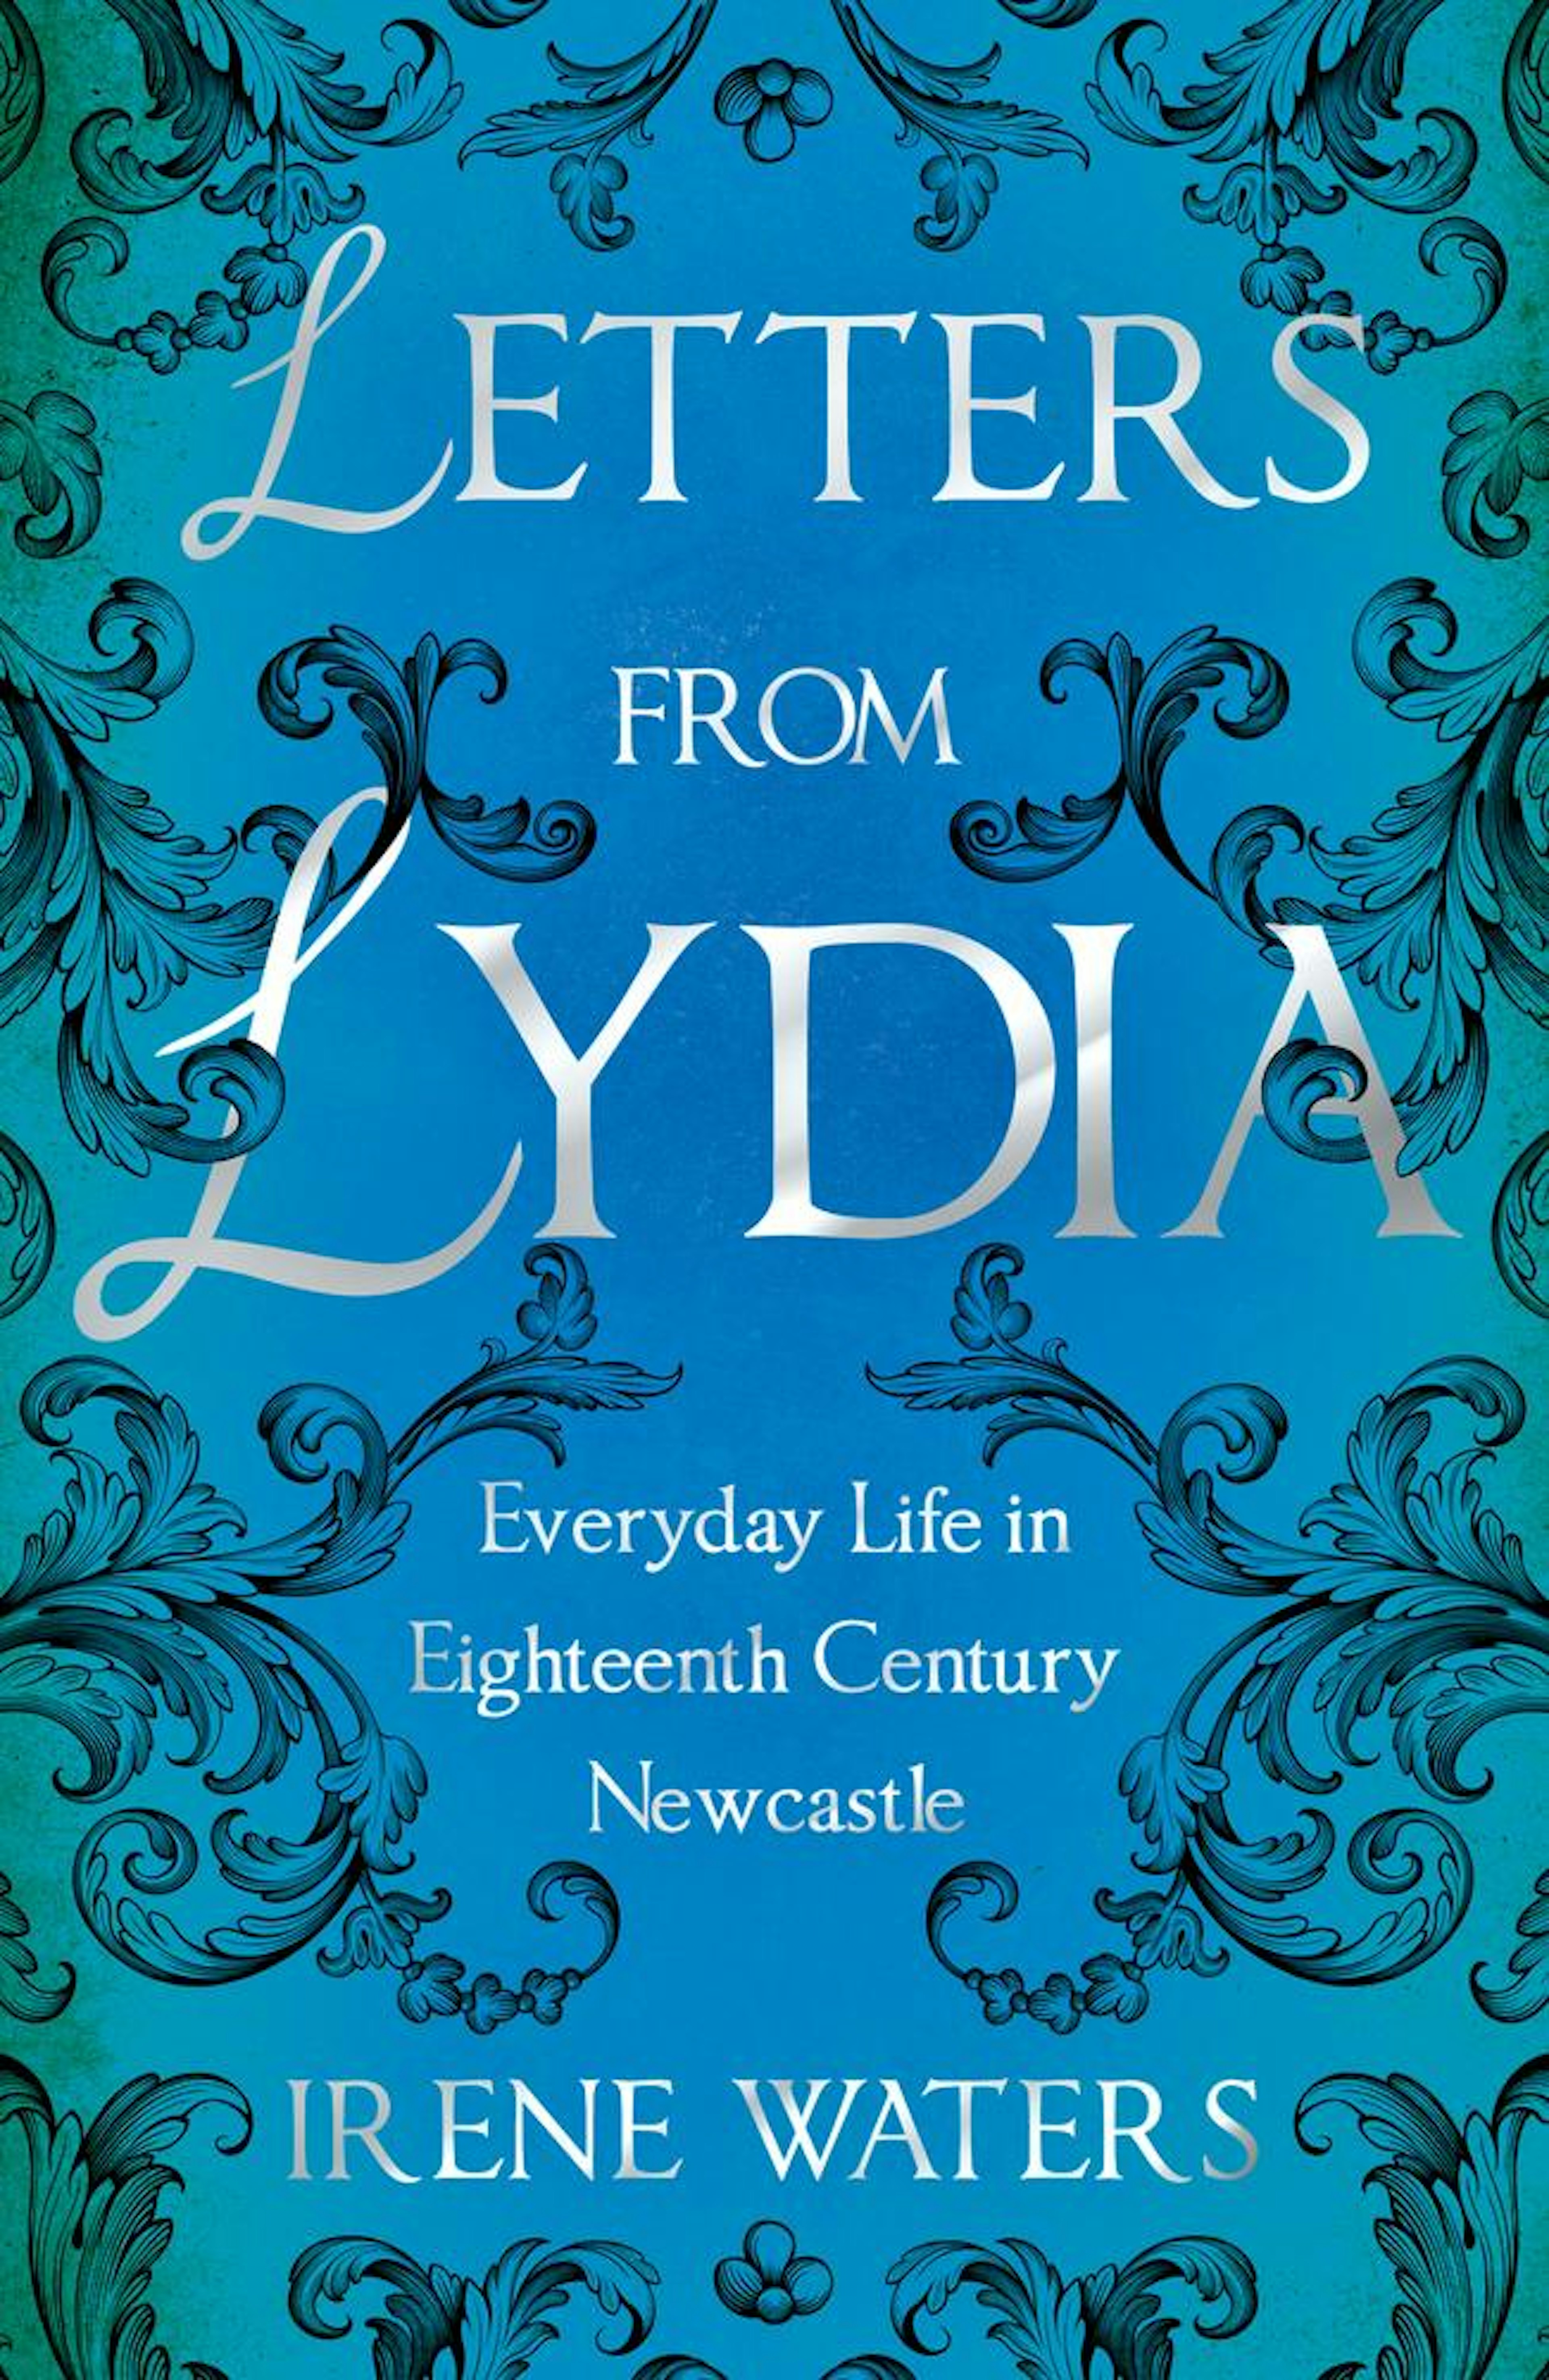 Letters from Lydia: Everyday Life in Eighteenth Century Newcastle